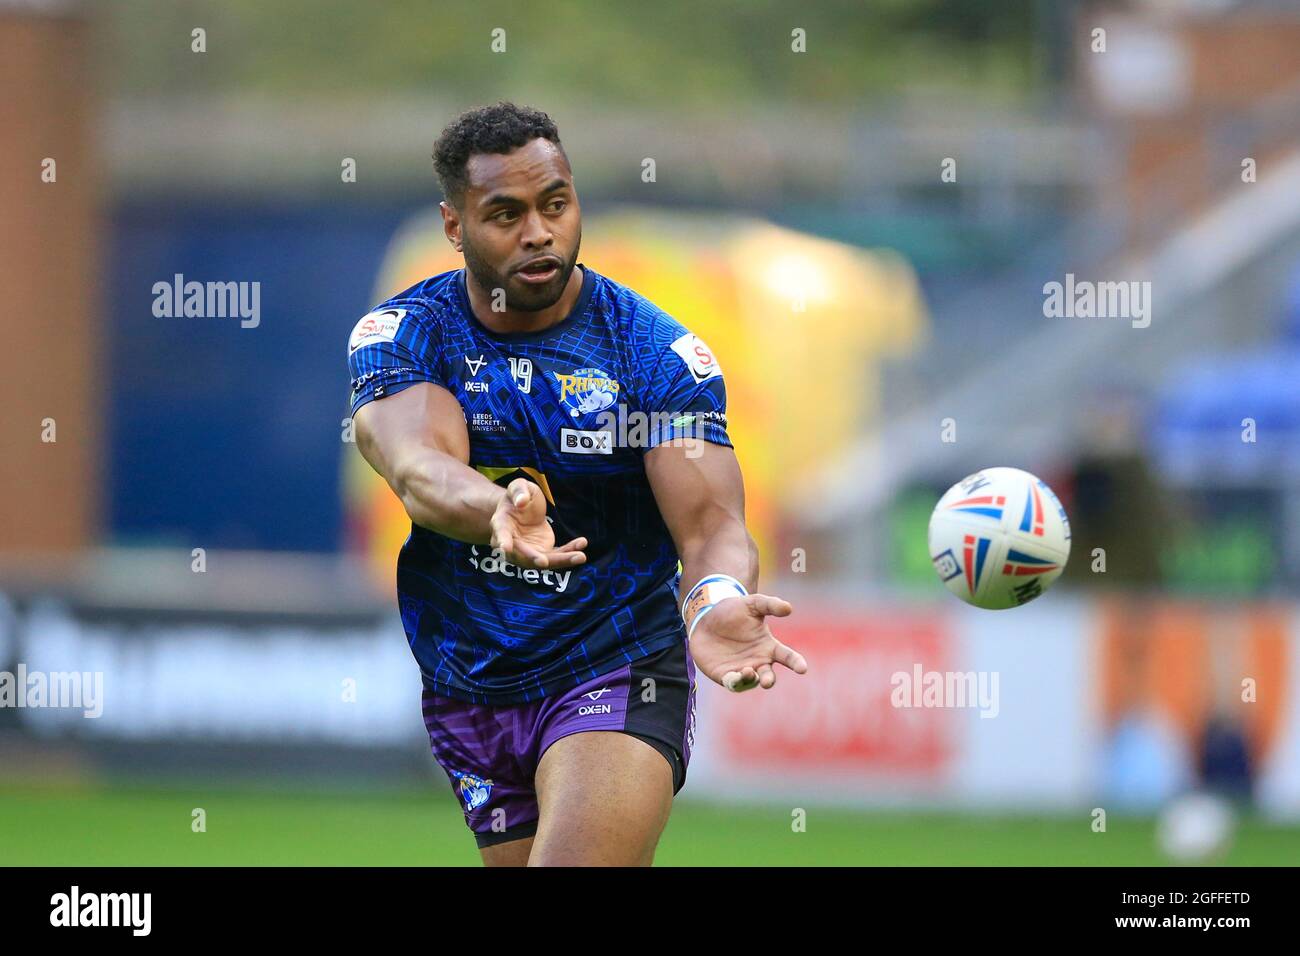 Wigan, UK. 25th Aug, 2021. King Vuniyayawa (19) of Leeds Rhinos during the warm up for the game in Wigan, United Kingdom on 8/25/2021. (Photo by Conor Molloy/News Images/Sipa USA) Credit: Sipa USA/Alamy Live News Stock Photo